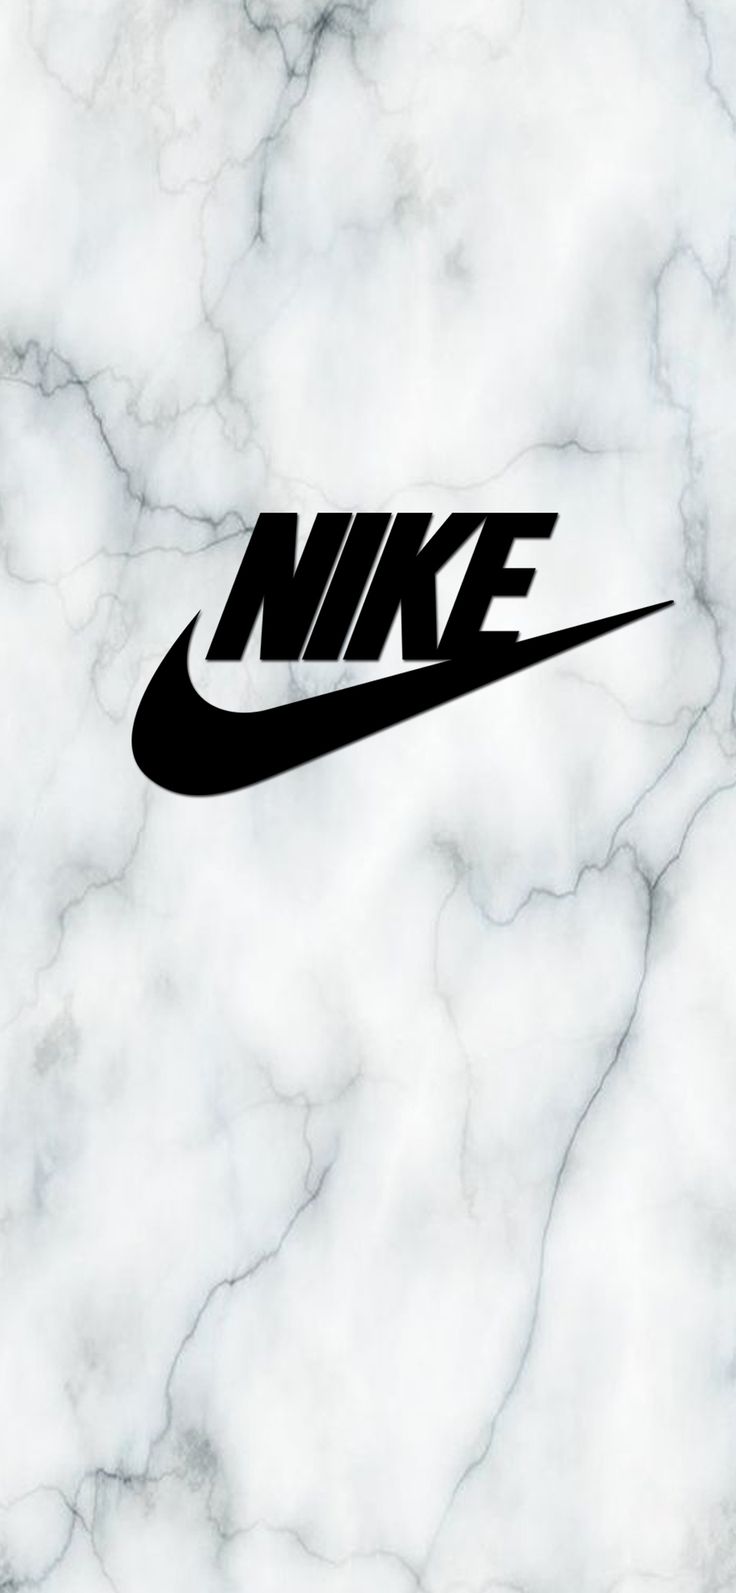 Nike iPhone X wallpaper. You can order iphone case with this picture. Just click on picture :). Nike logo wallpaper, Nike wallpaper, Purple wallpaper iphone